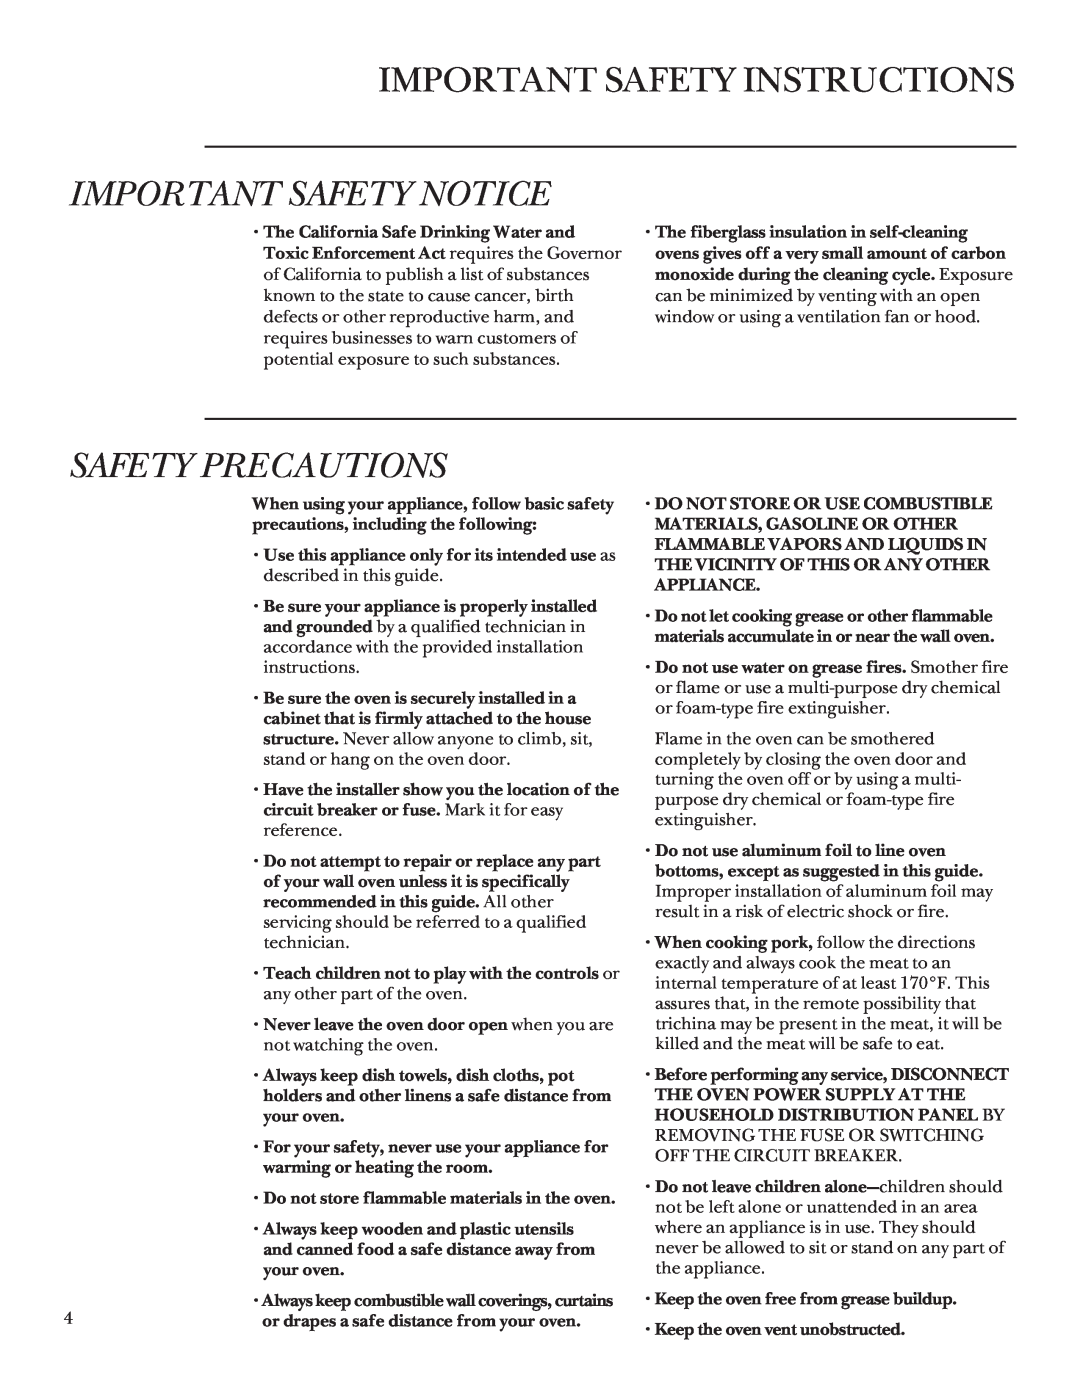 GE 164D3333P095 manual Important Safety Instructions, Important Safety Notice, Safety Precautions 